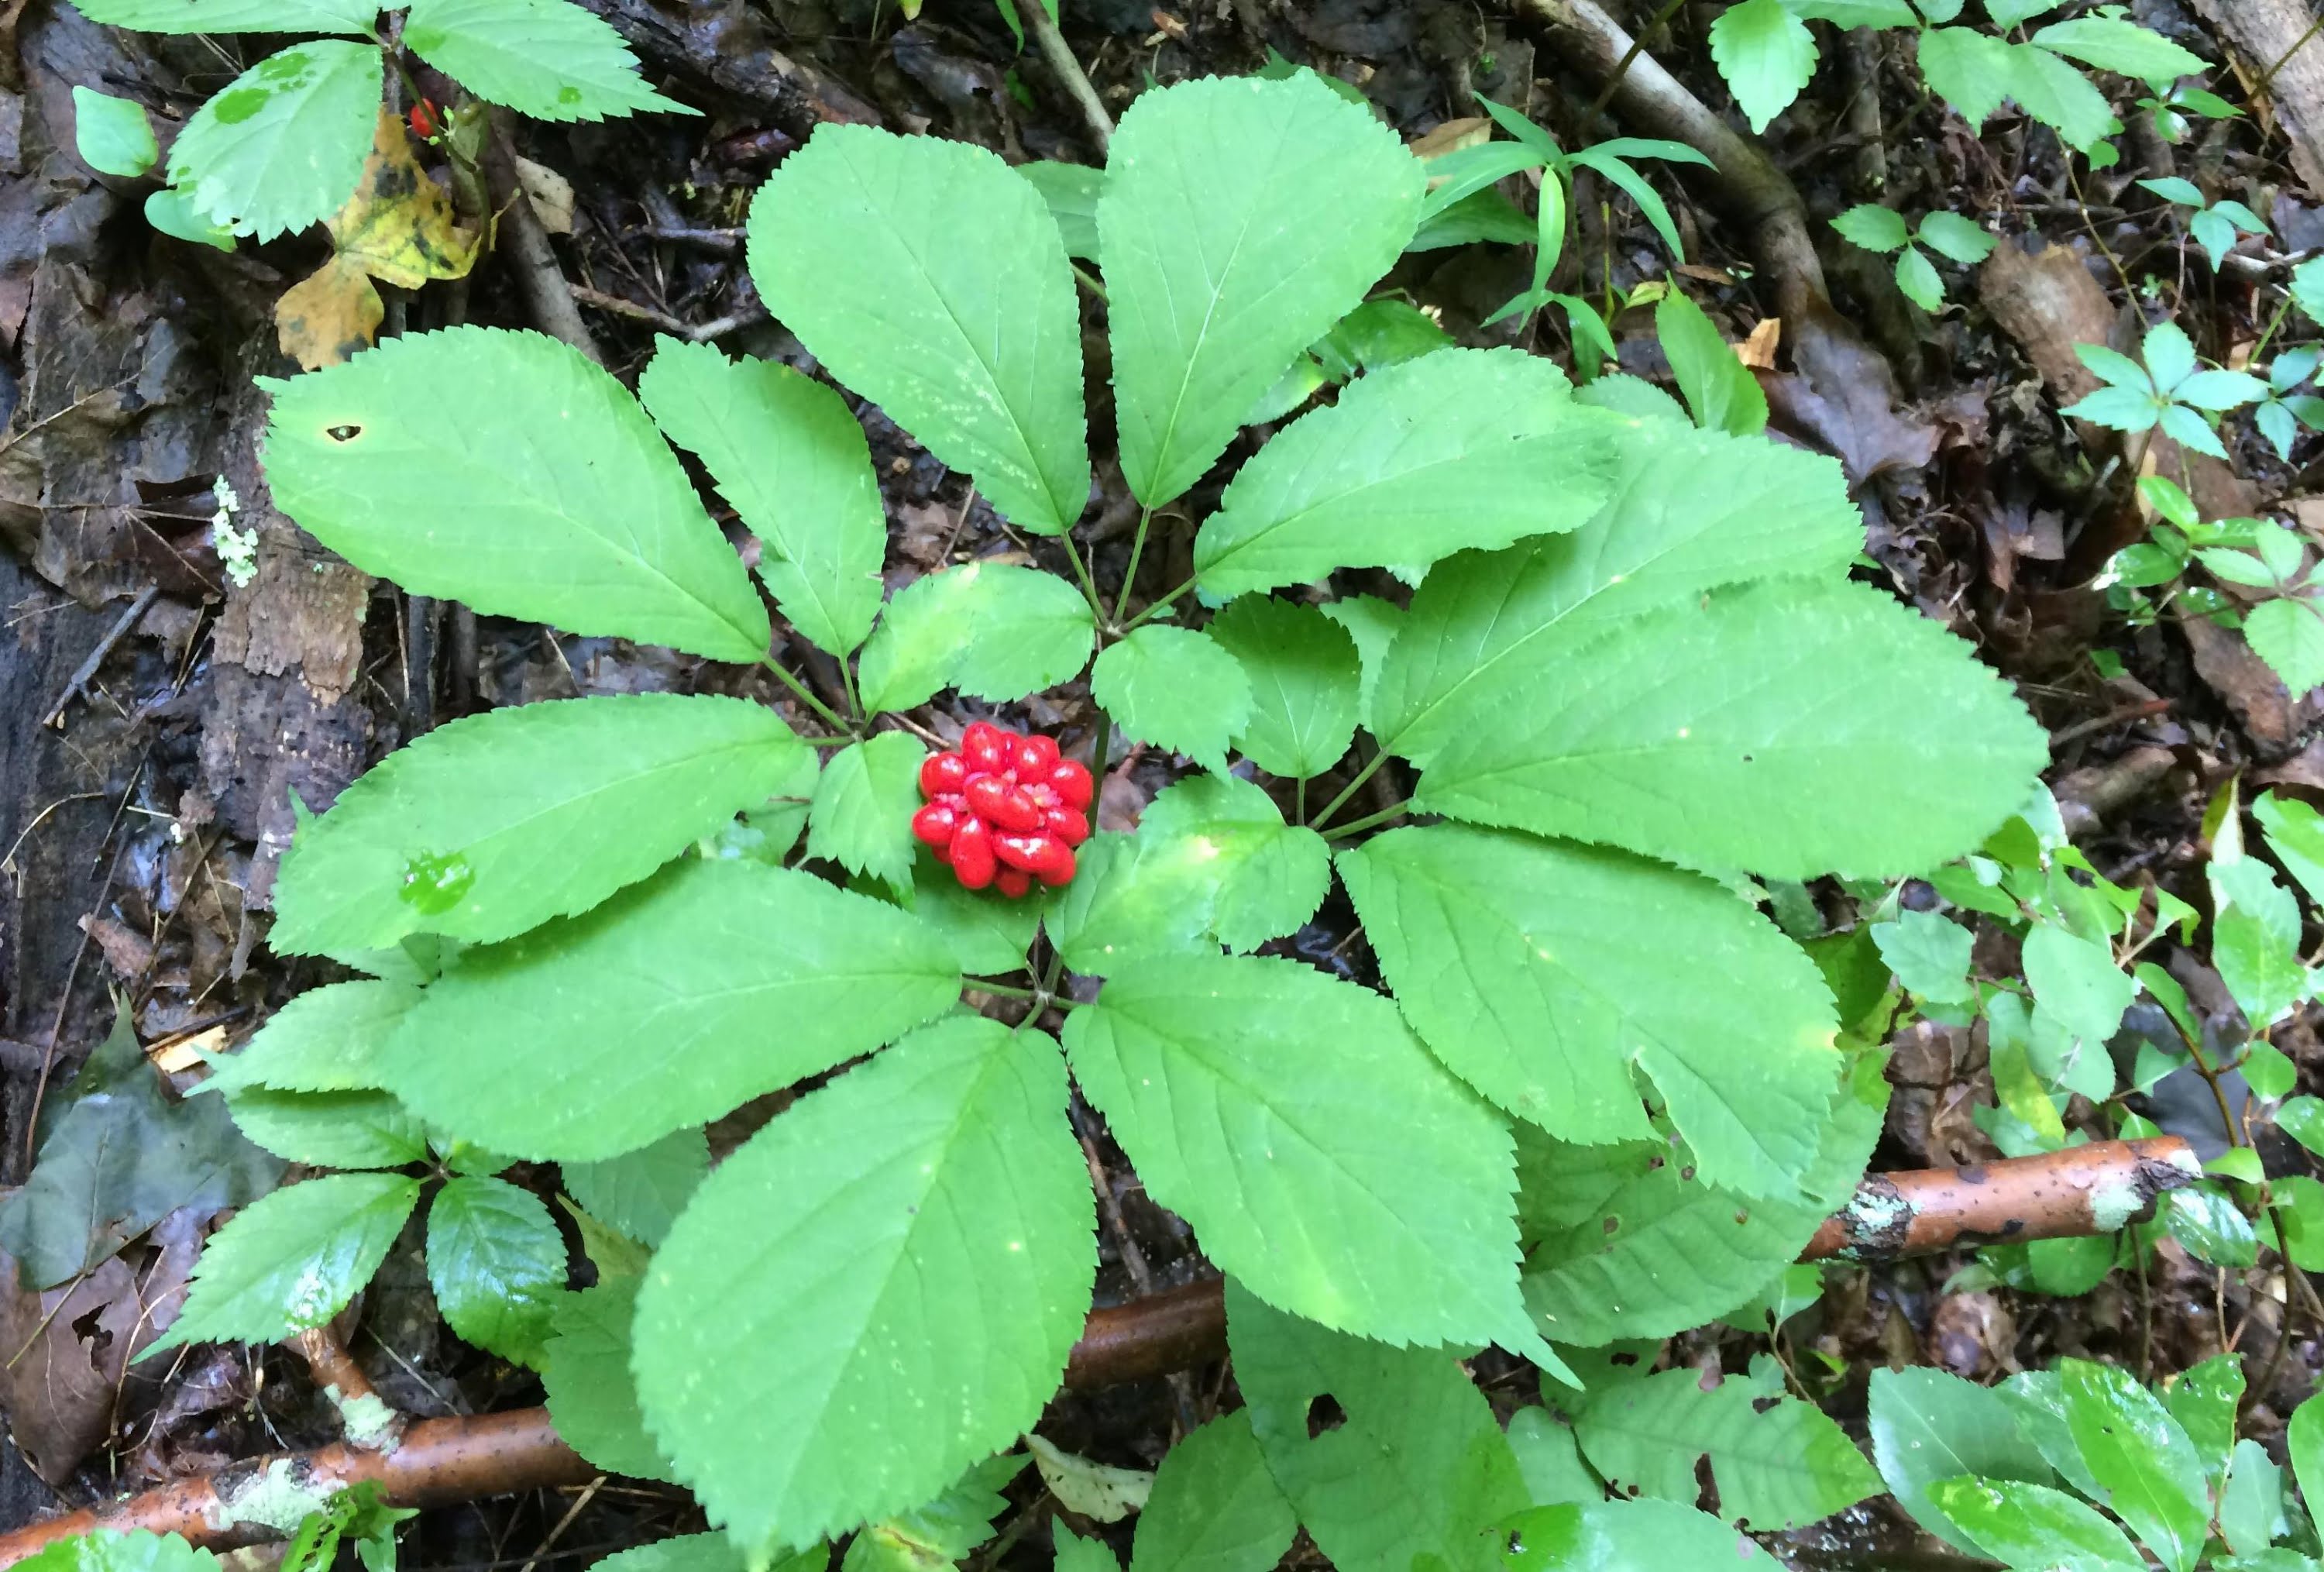 Ginseng Hunting video in the fall of 2014 - YouTube